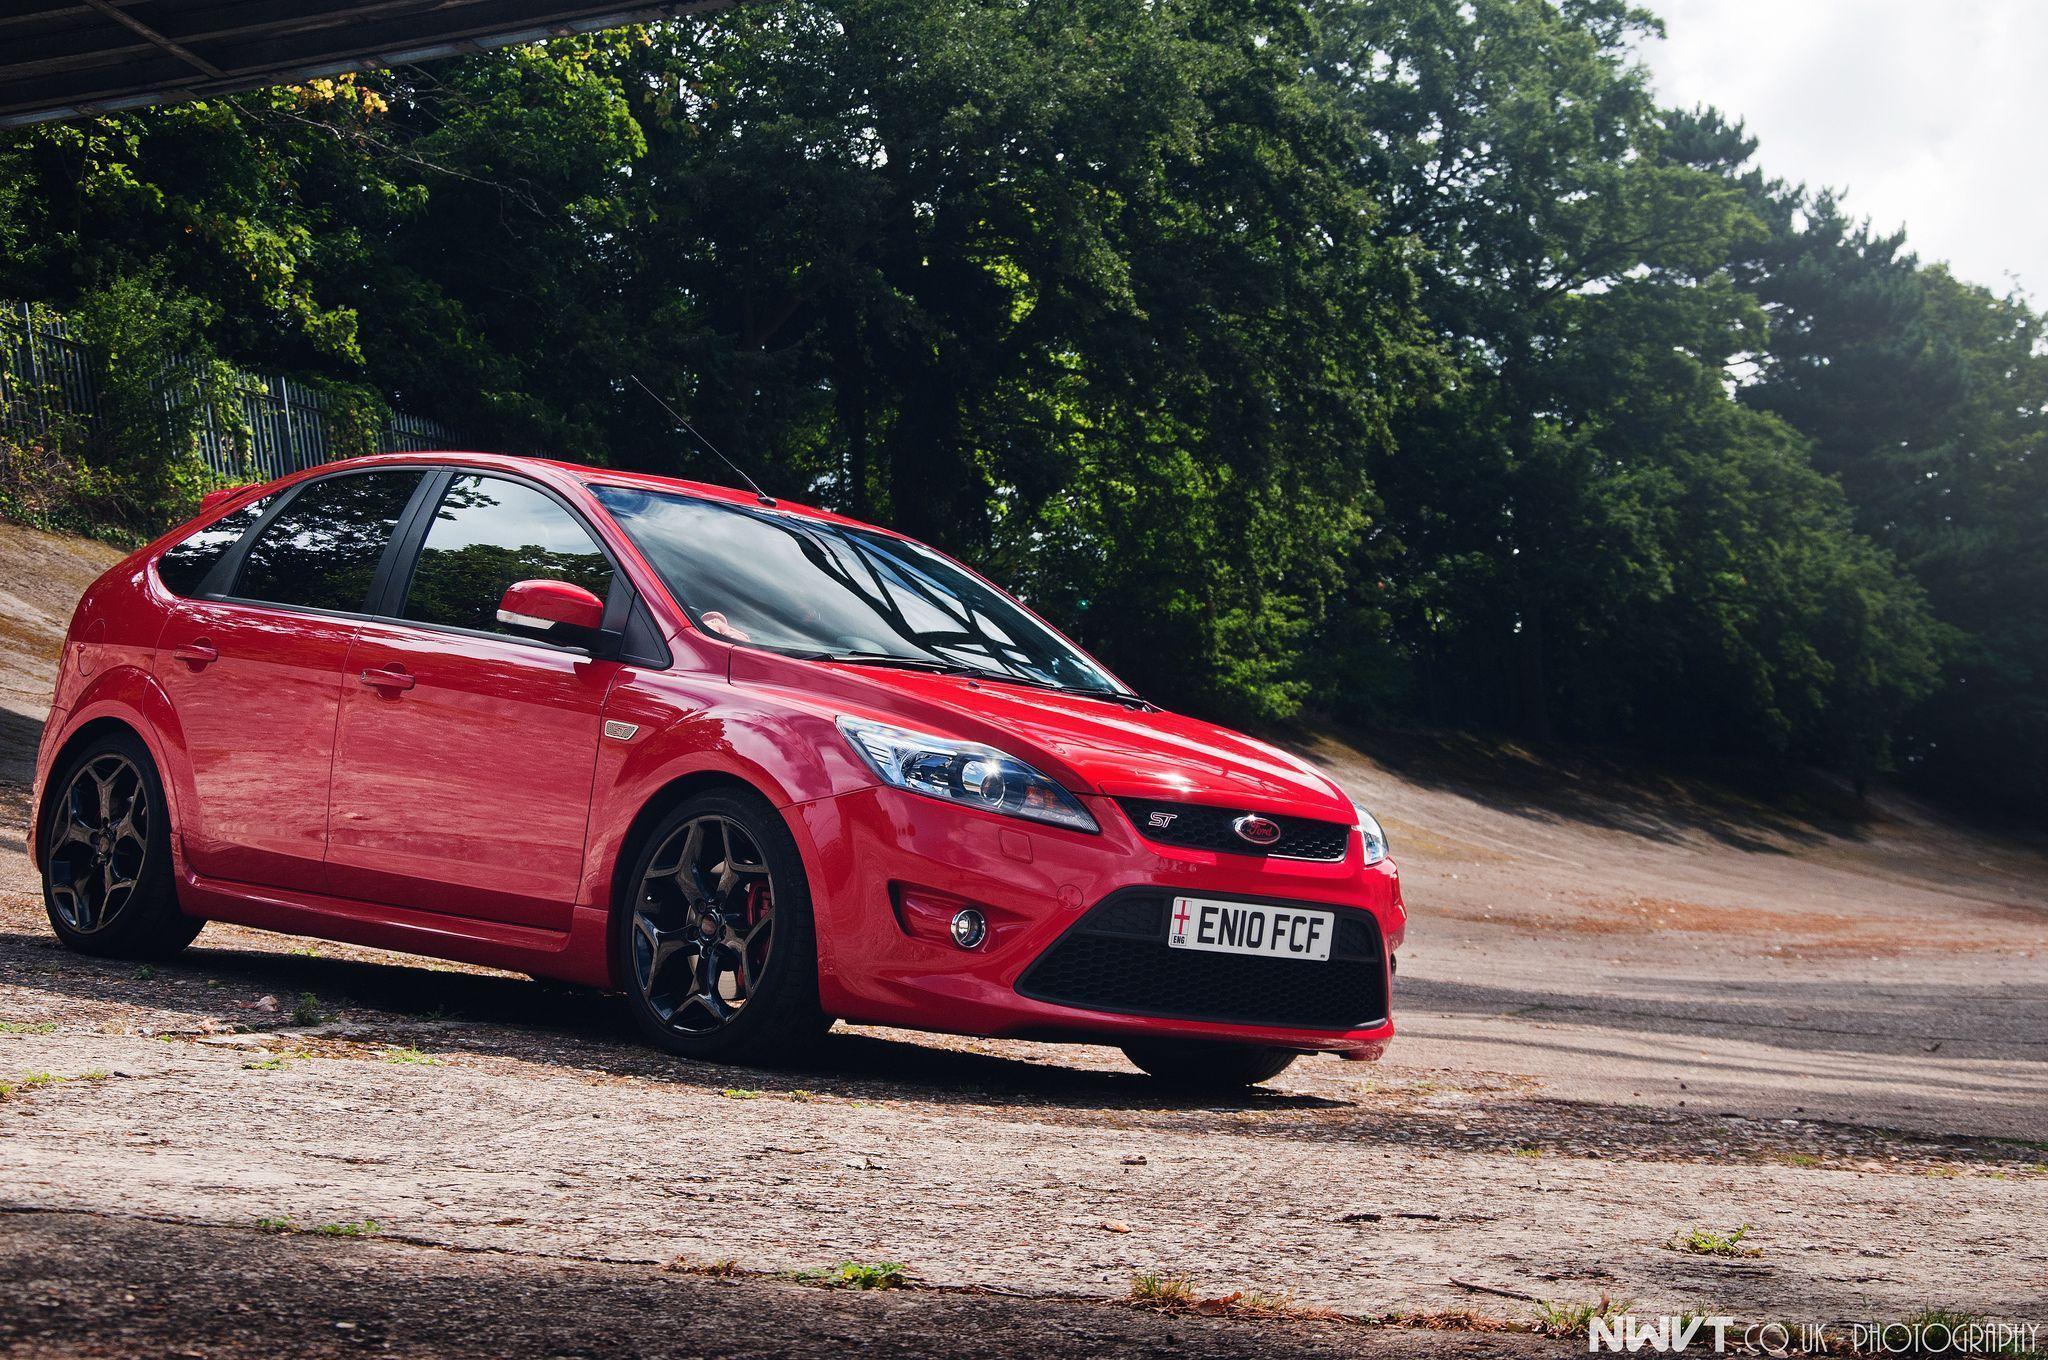 Amazing Ford Focus Holy Drift Car Wallpaper and Videos